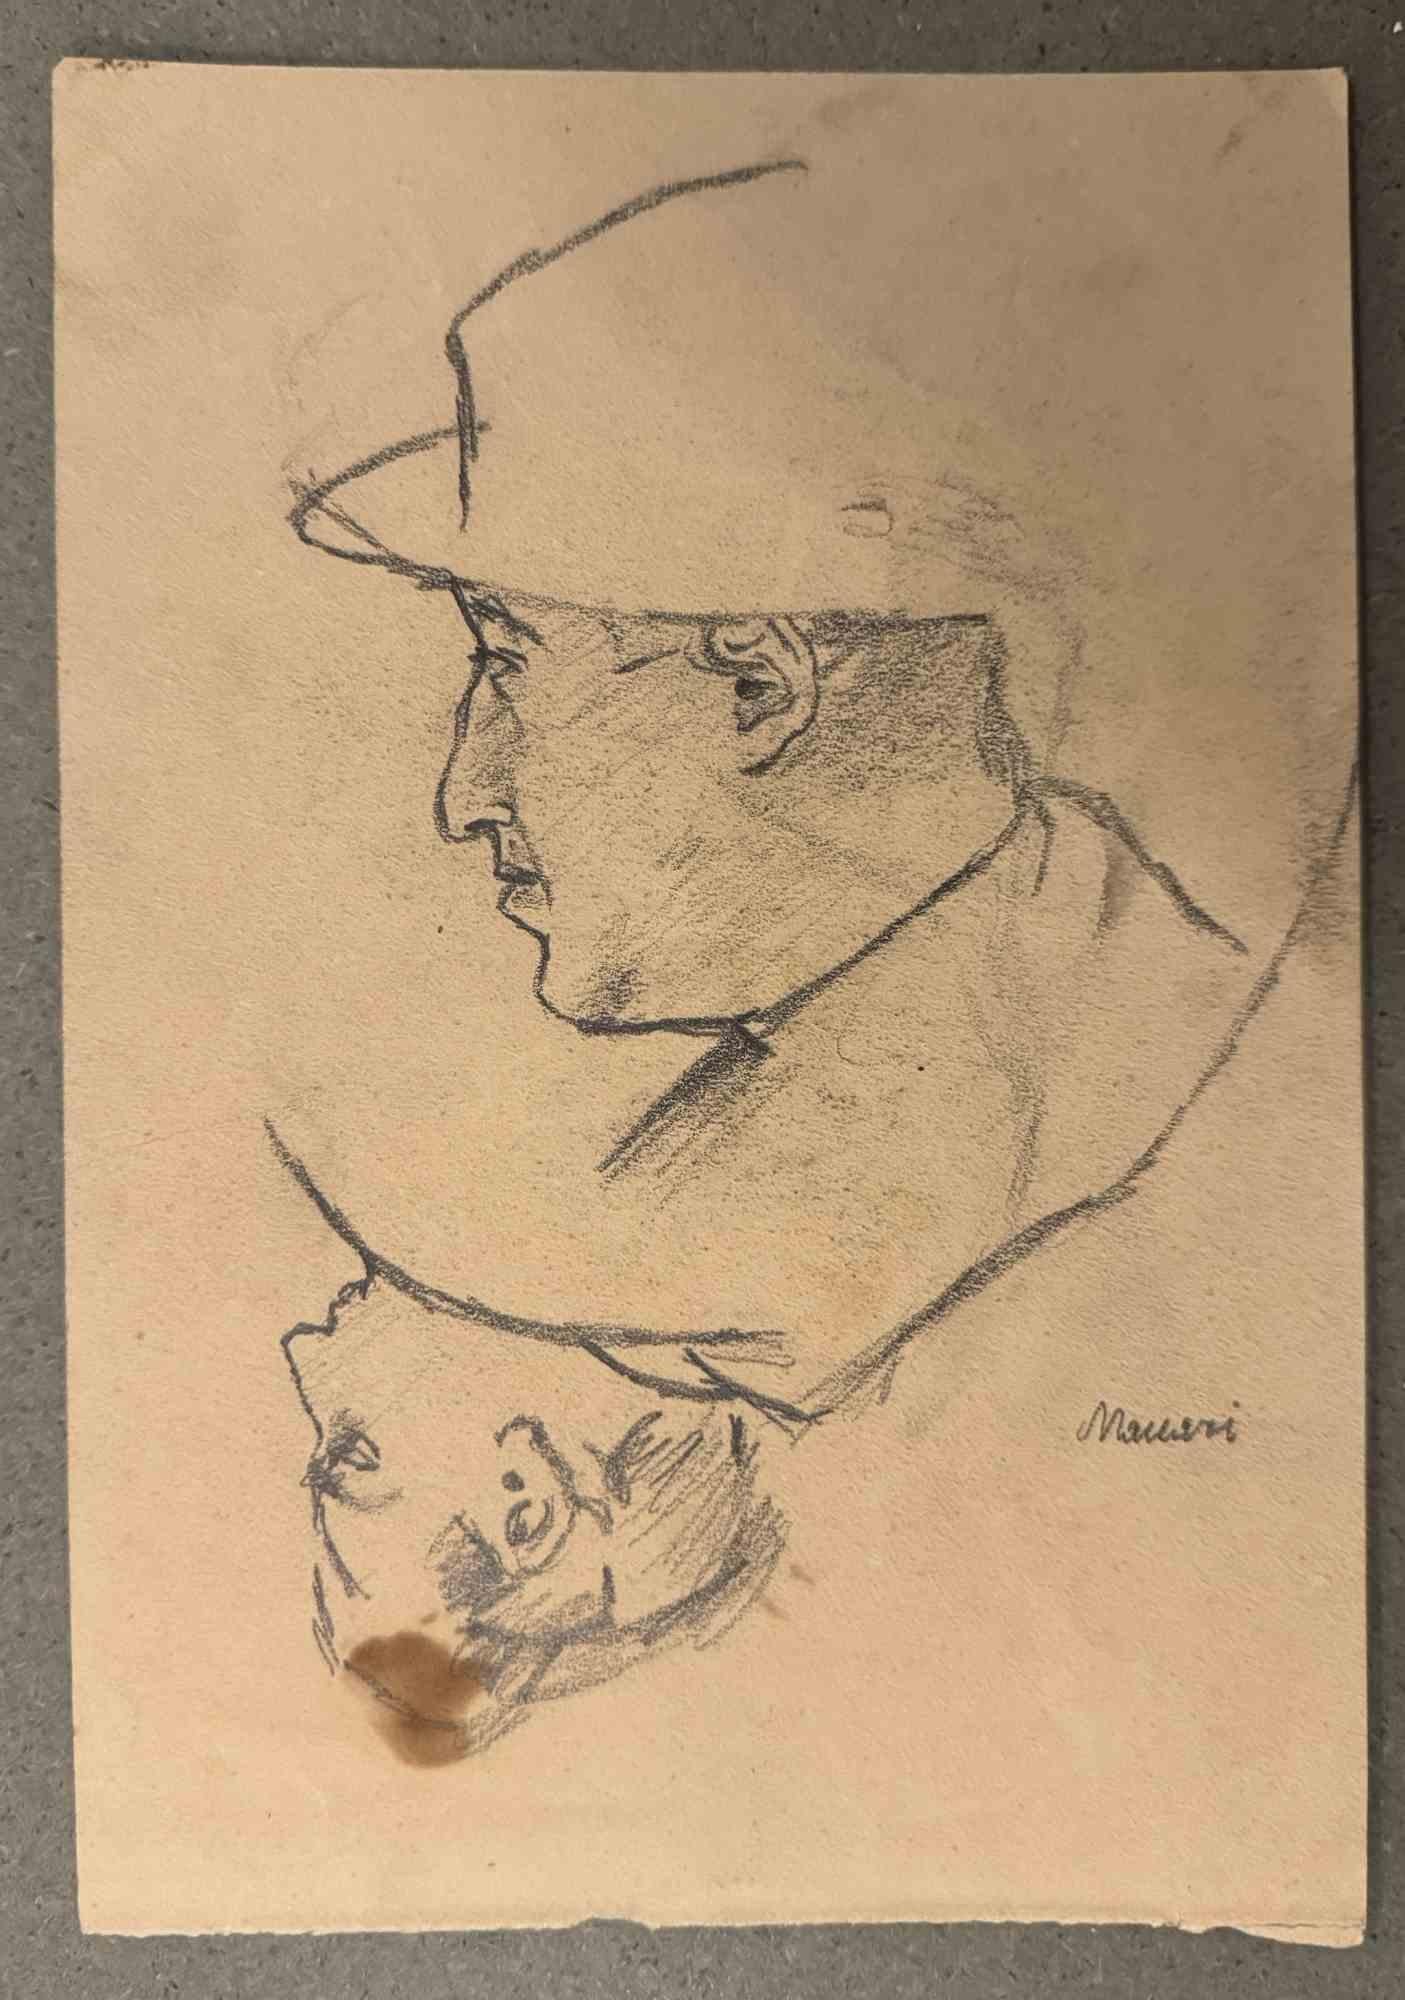 Portraits  is a charcoal drawing realized by Mino Maccari  (1924-1989) in the Mid-20th Century.

Hand-signed.

Good conditions with slight foxing.

Mino Maccari (Siena, 1924-Rome, June 16, 1989) was an Italian writer, painter, engraver and